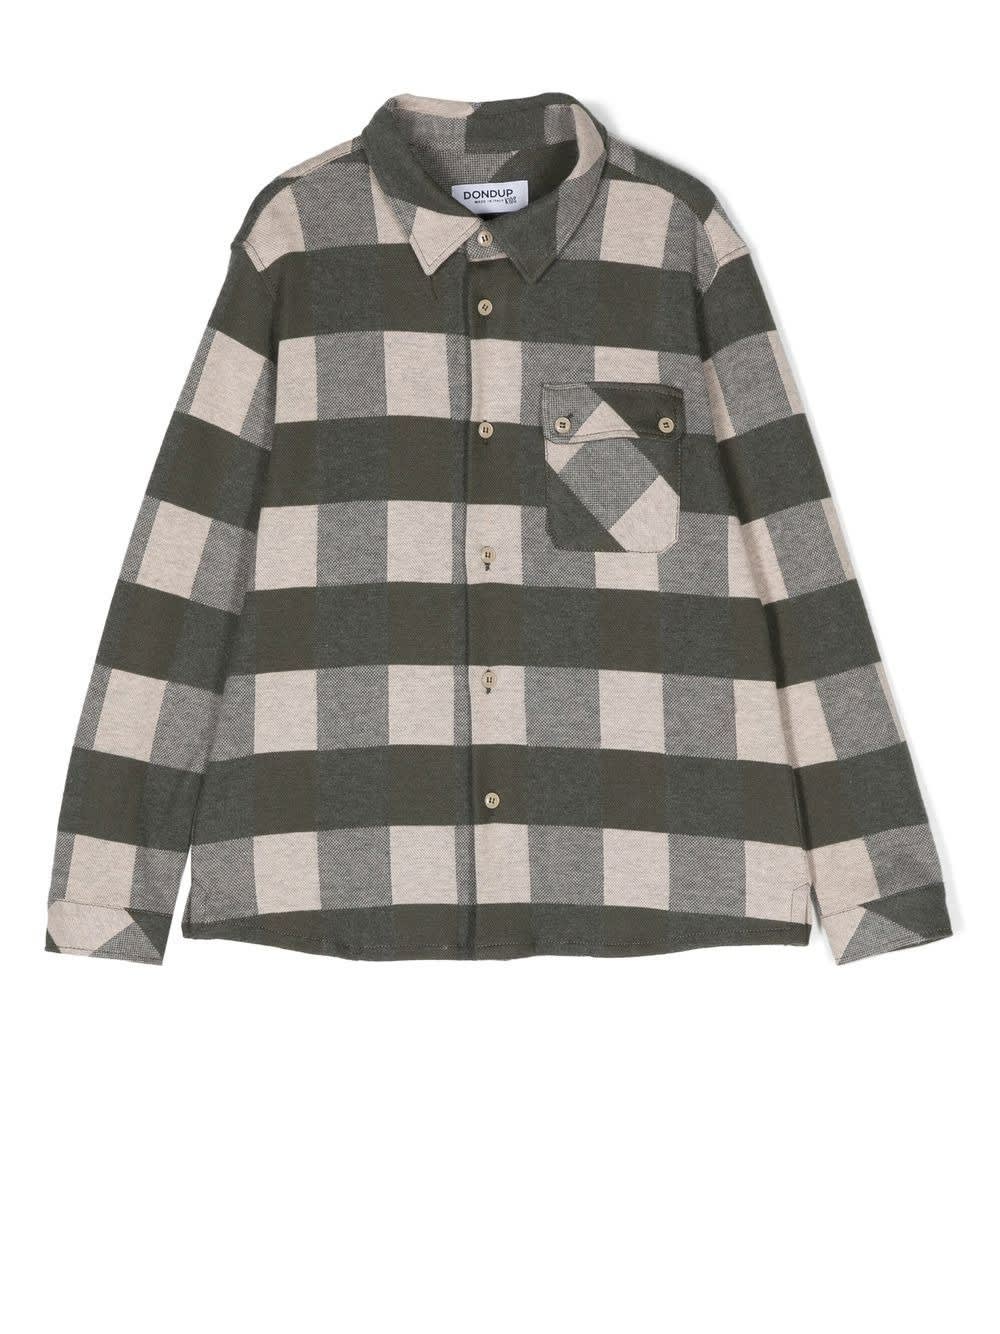 Dondup Kids Shirt In Military Green Check Cotton